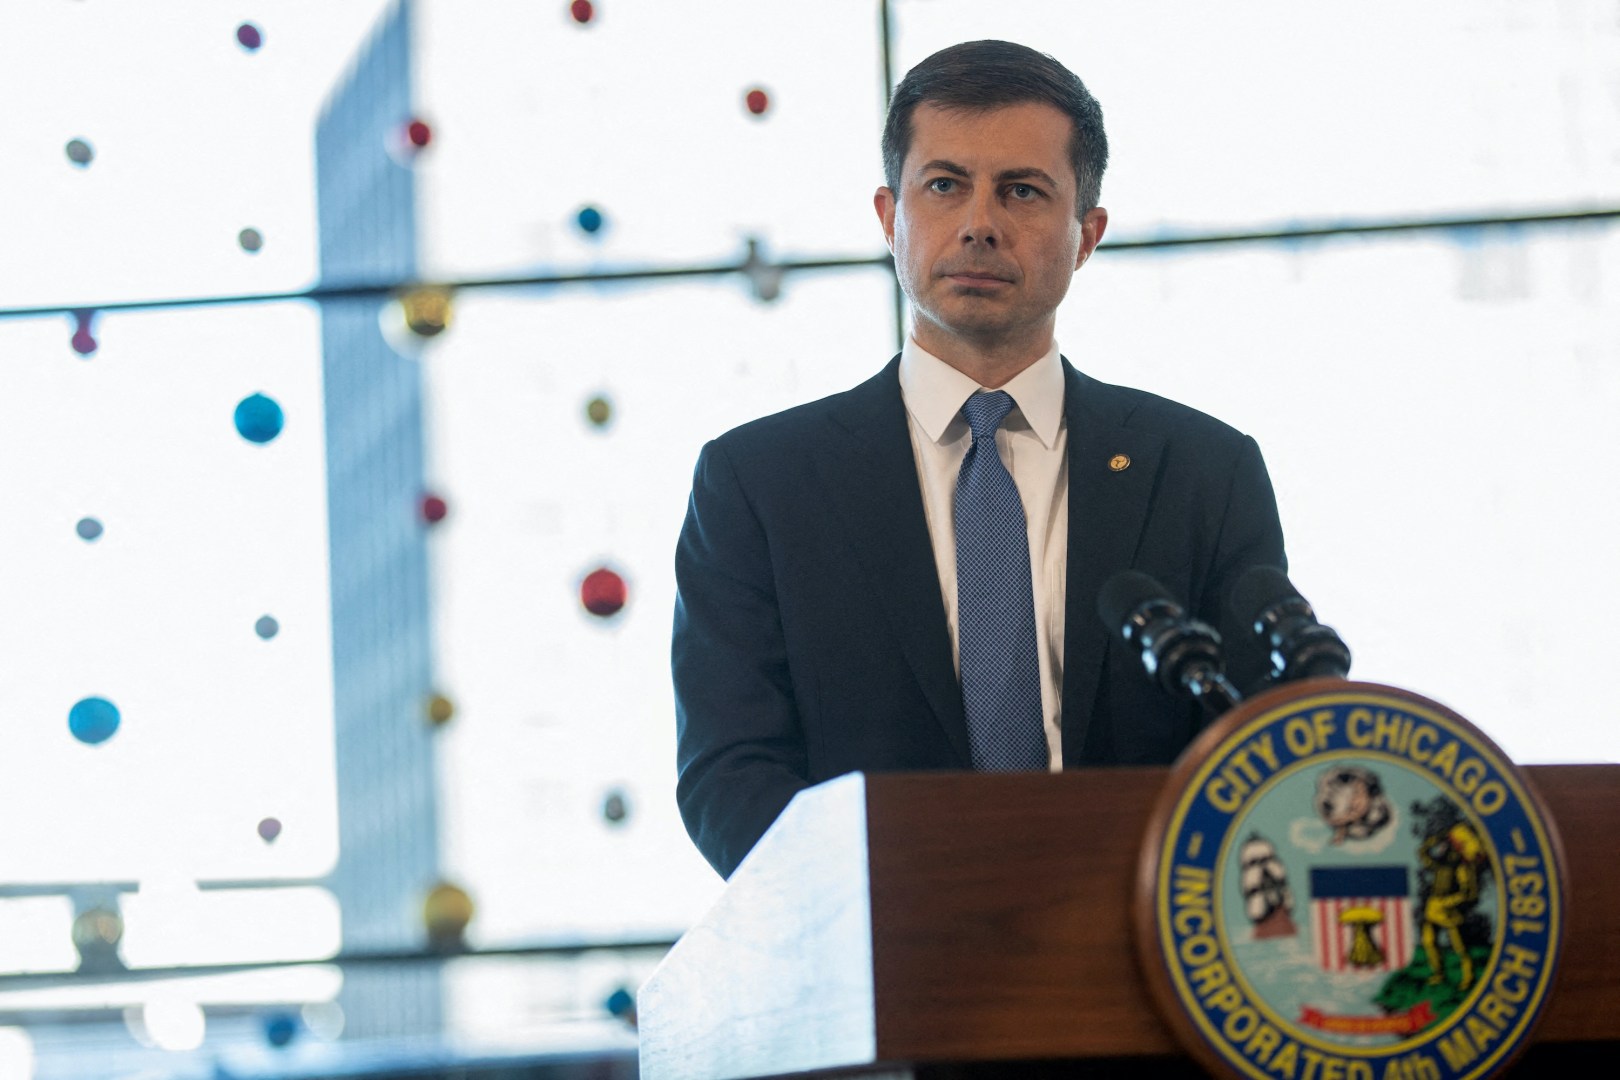 Critics say Pete Buttigieg should focus on repairing America's infrastructure, instead of turning highway planning into a race issue.